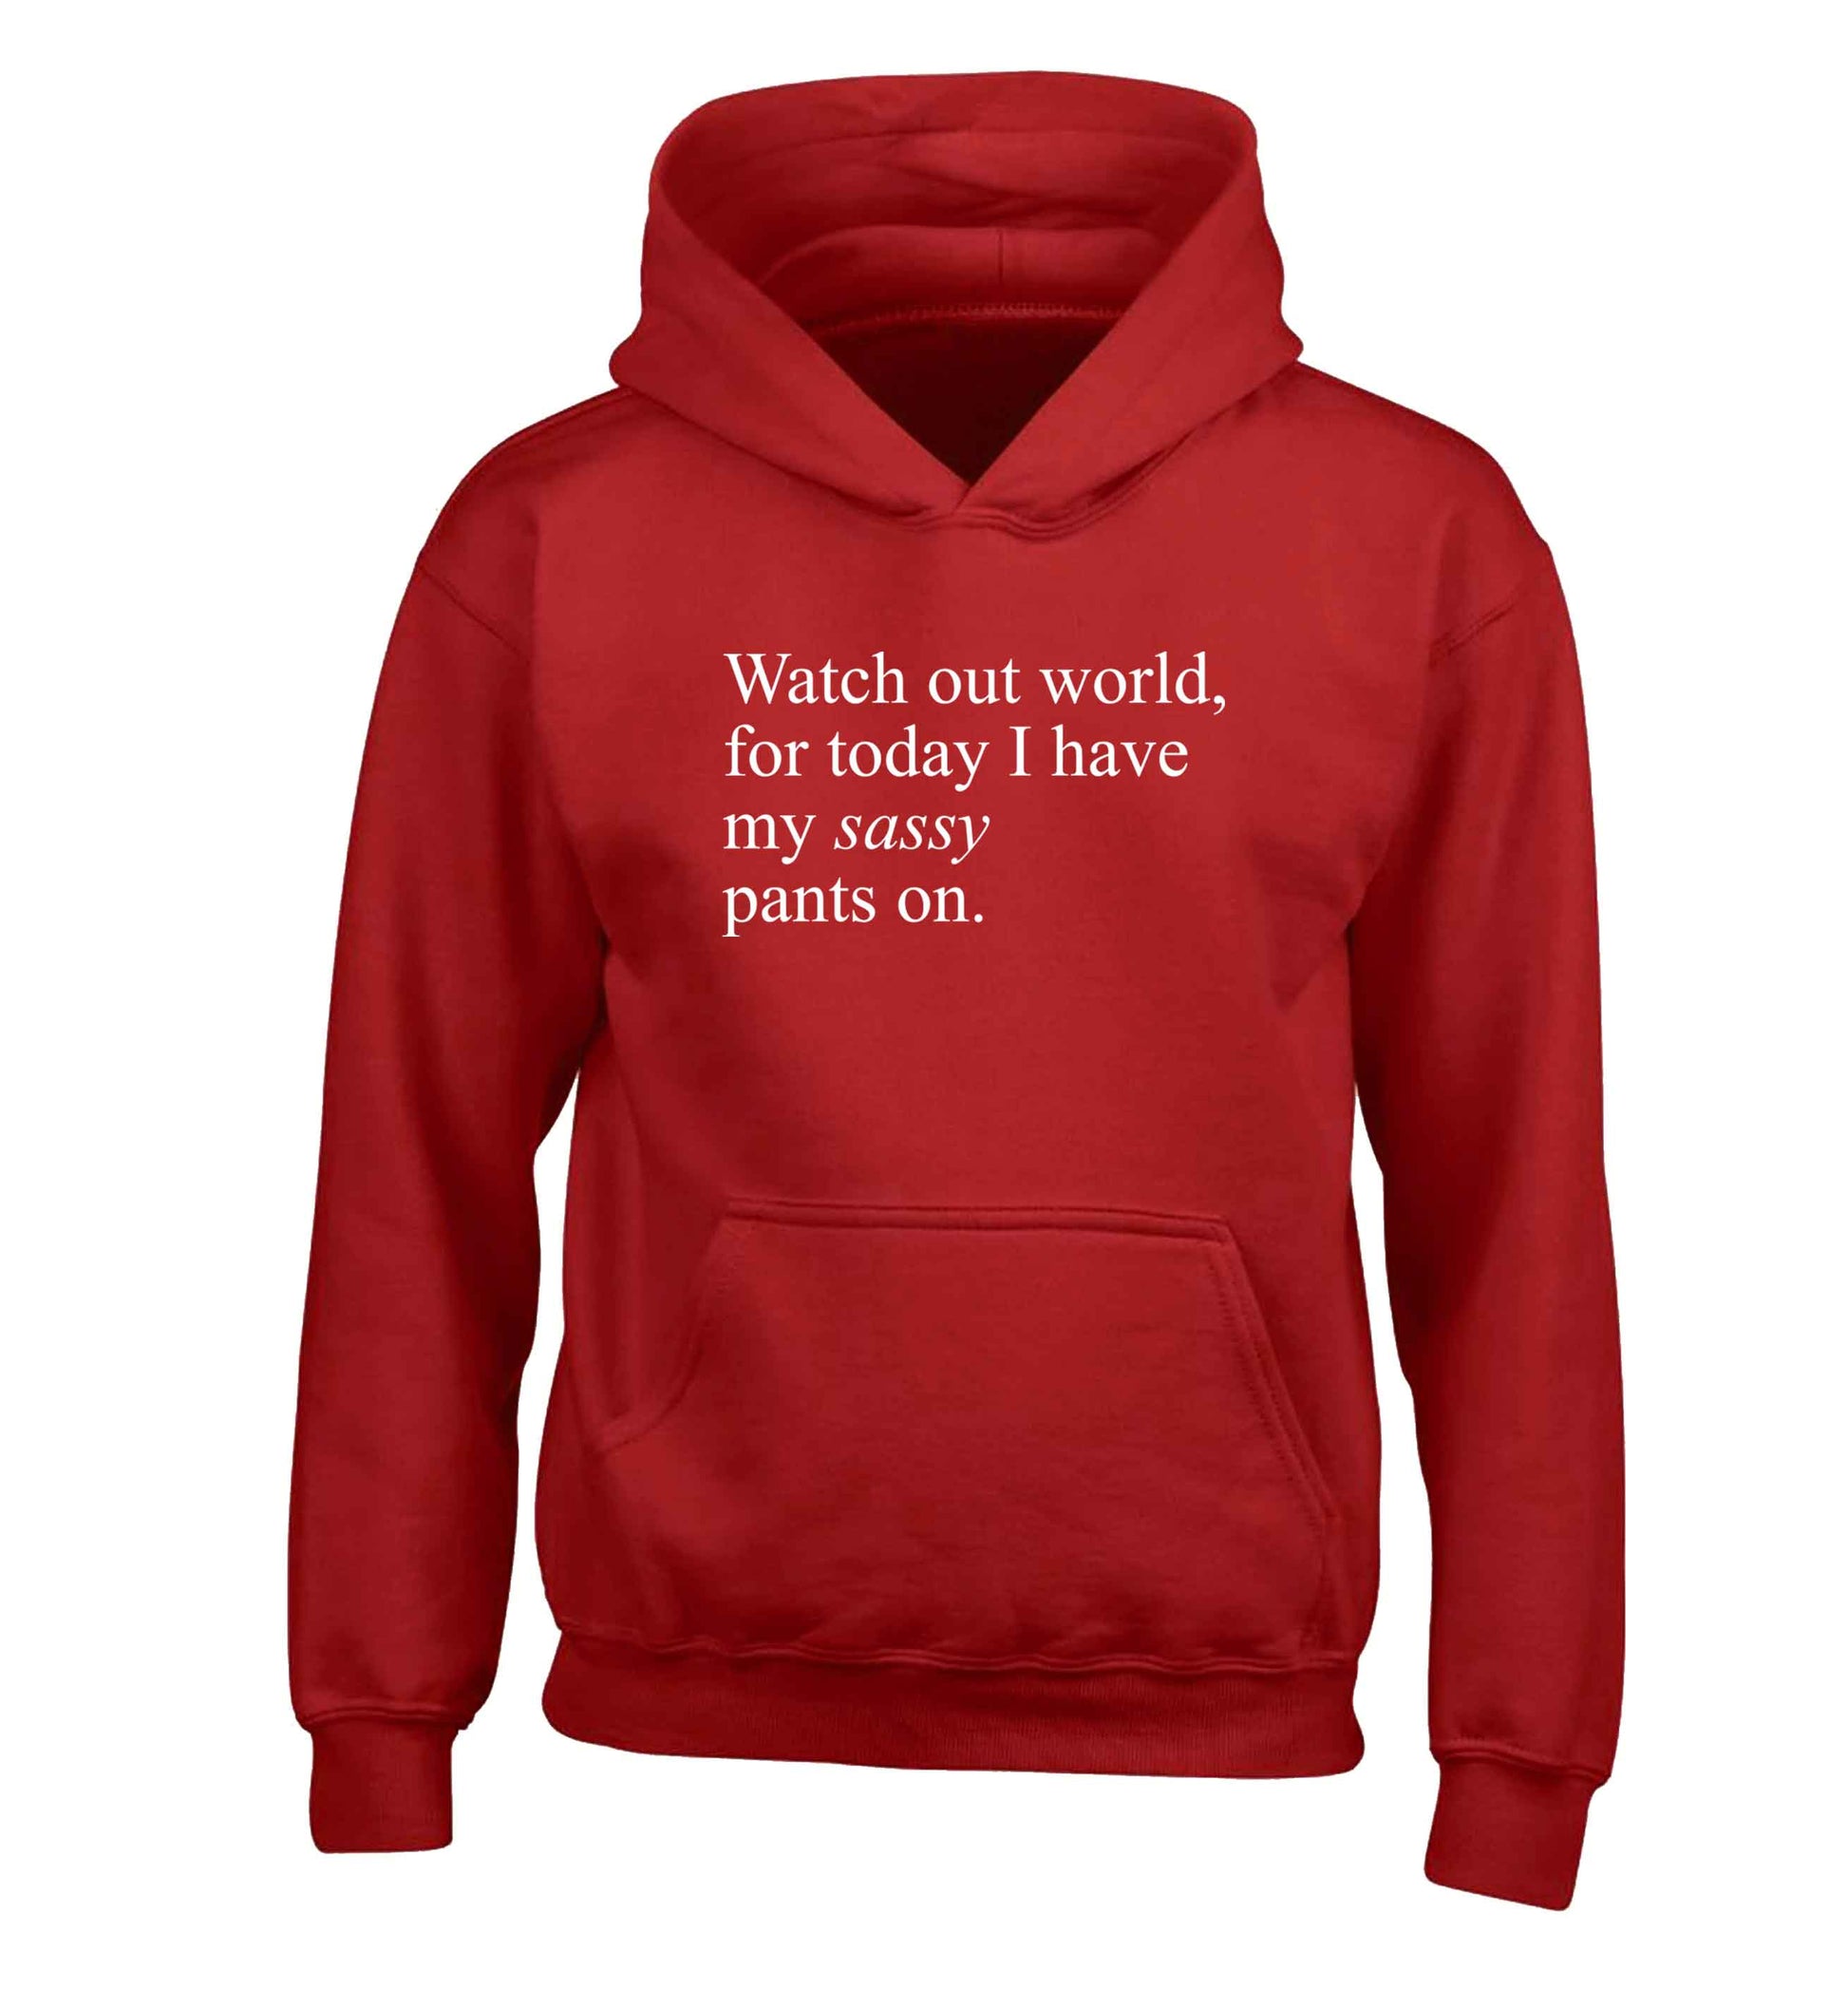 Watch out world for today I have my sassy pants on children's red hoodie 12-13 Years